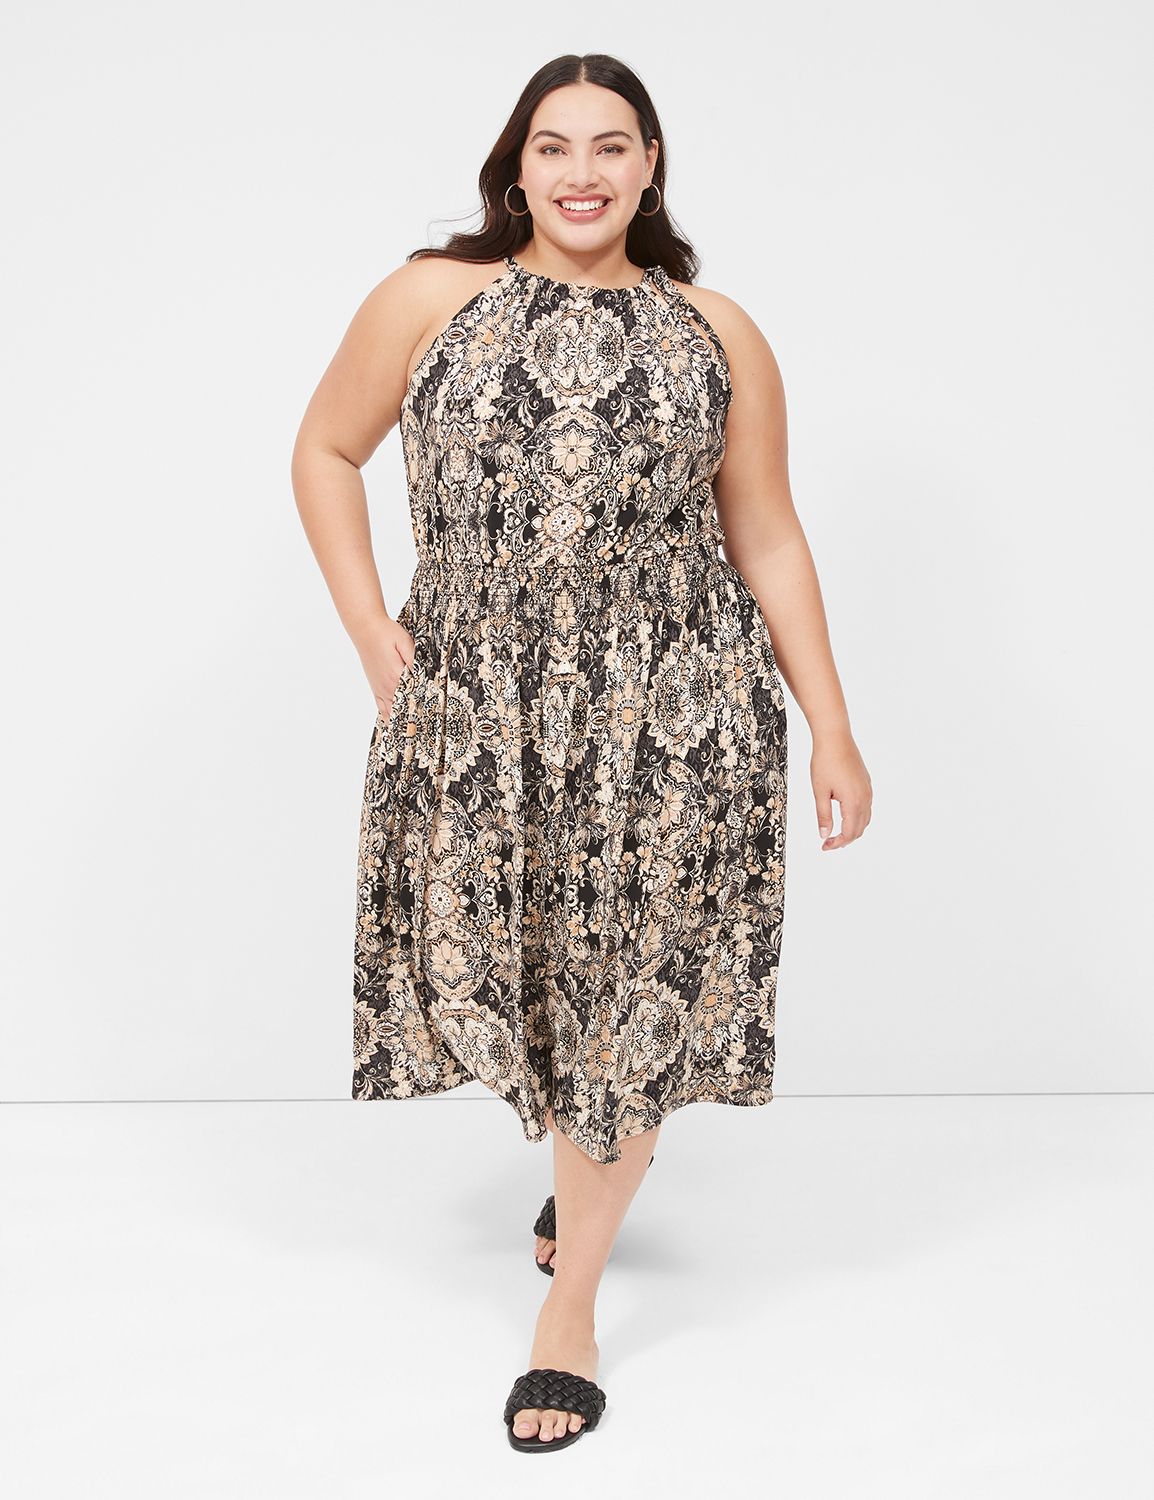 Loading  Casual work outfits, Plus size outfits, Plus size fashion